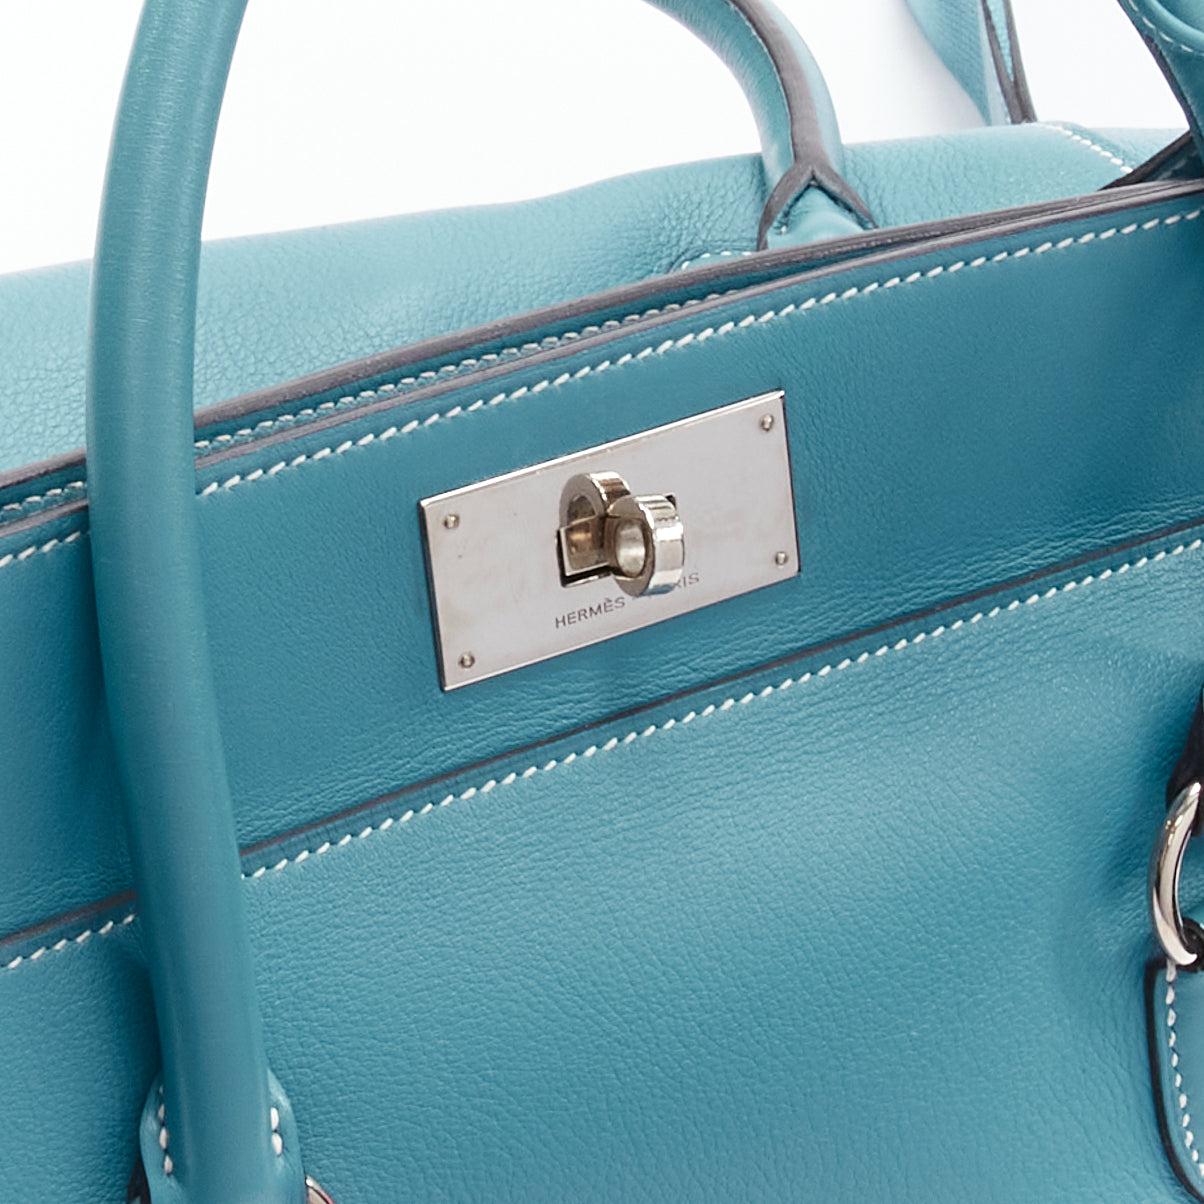 HERMES Toolbox 26 teal blue grained leather SHW top handle satchel For Sale 4